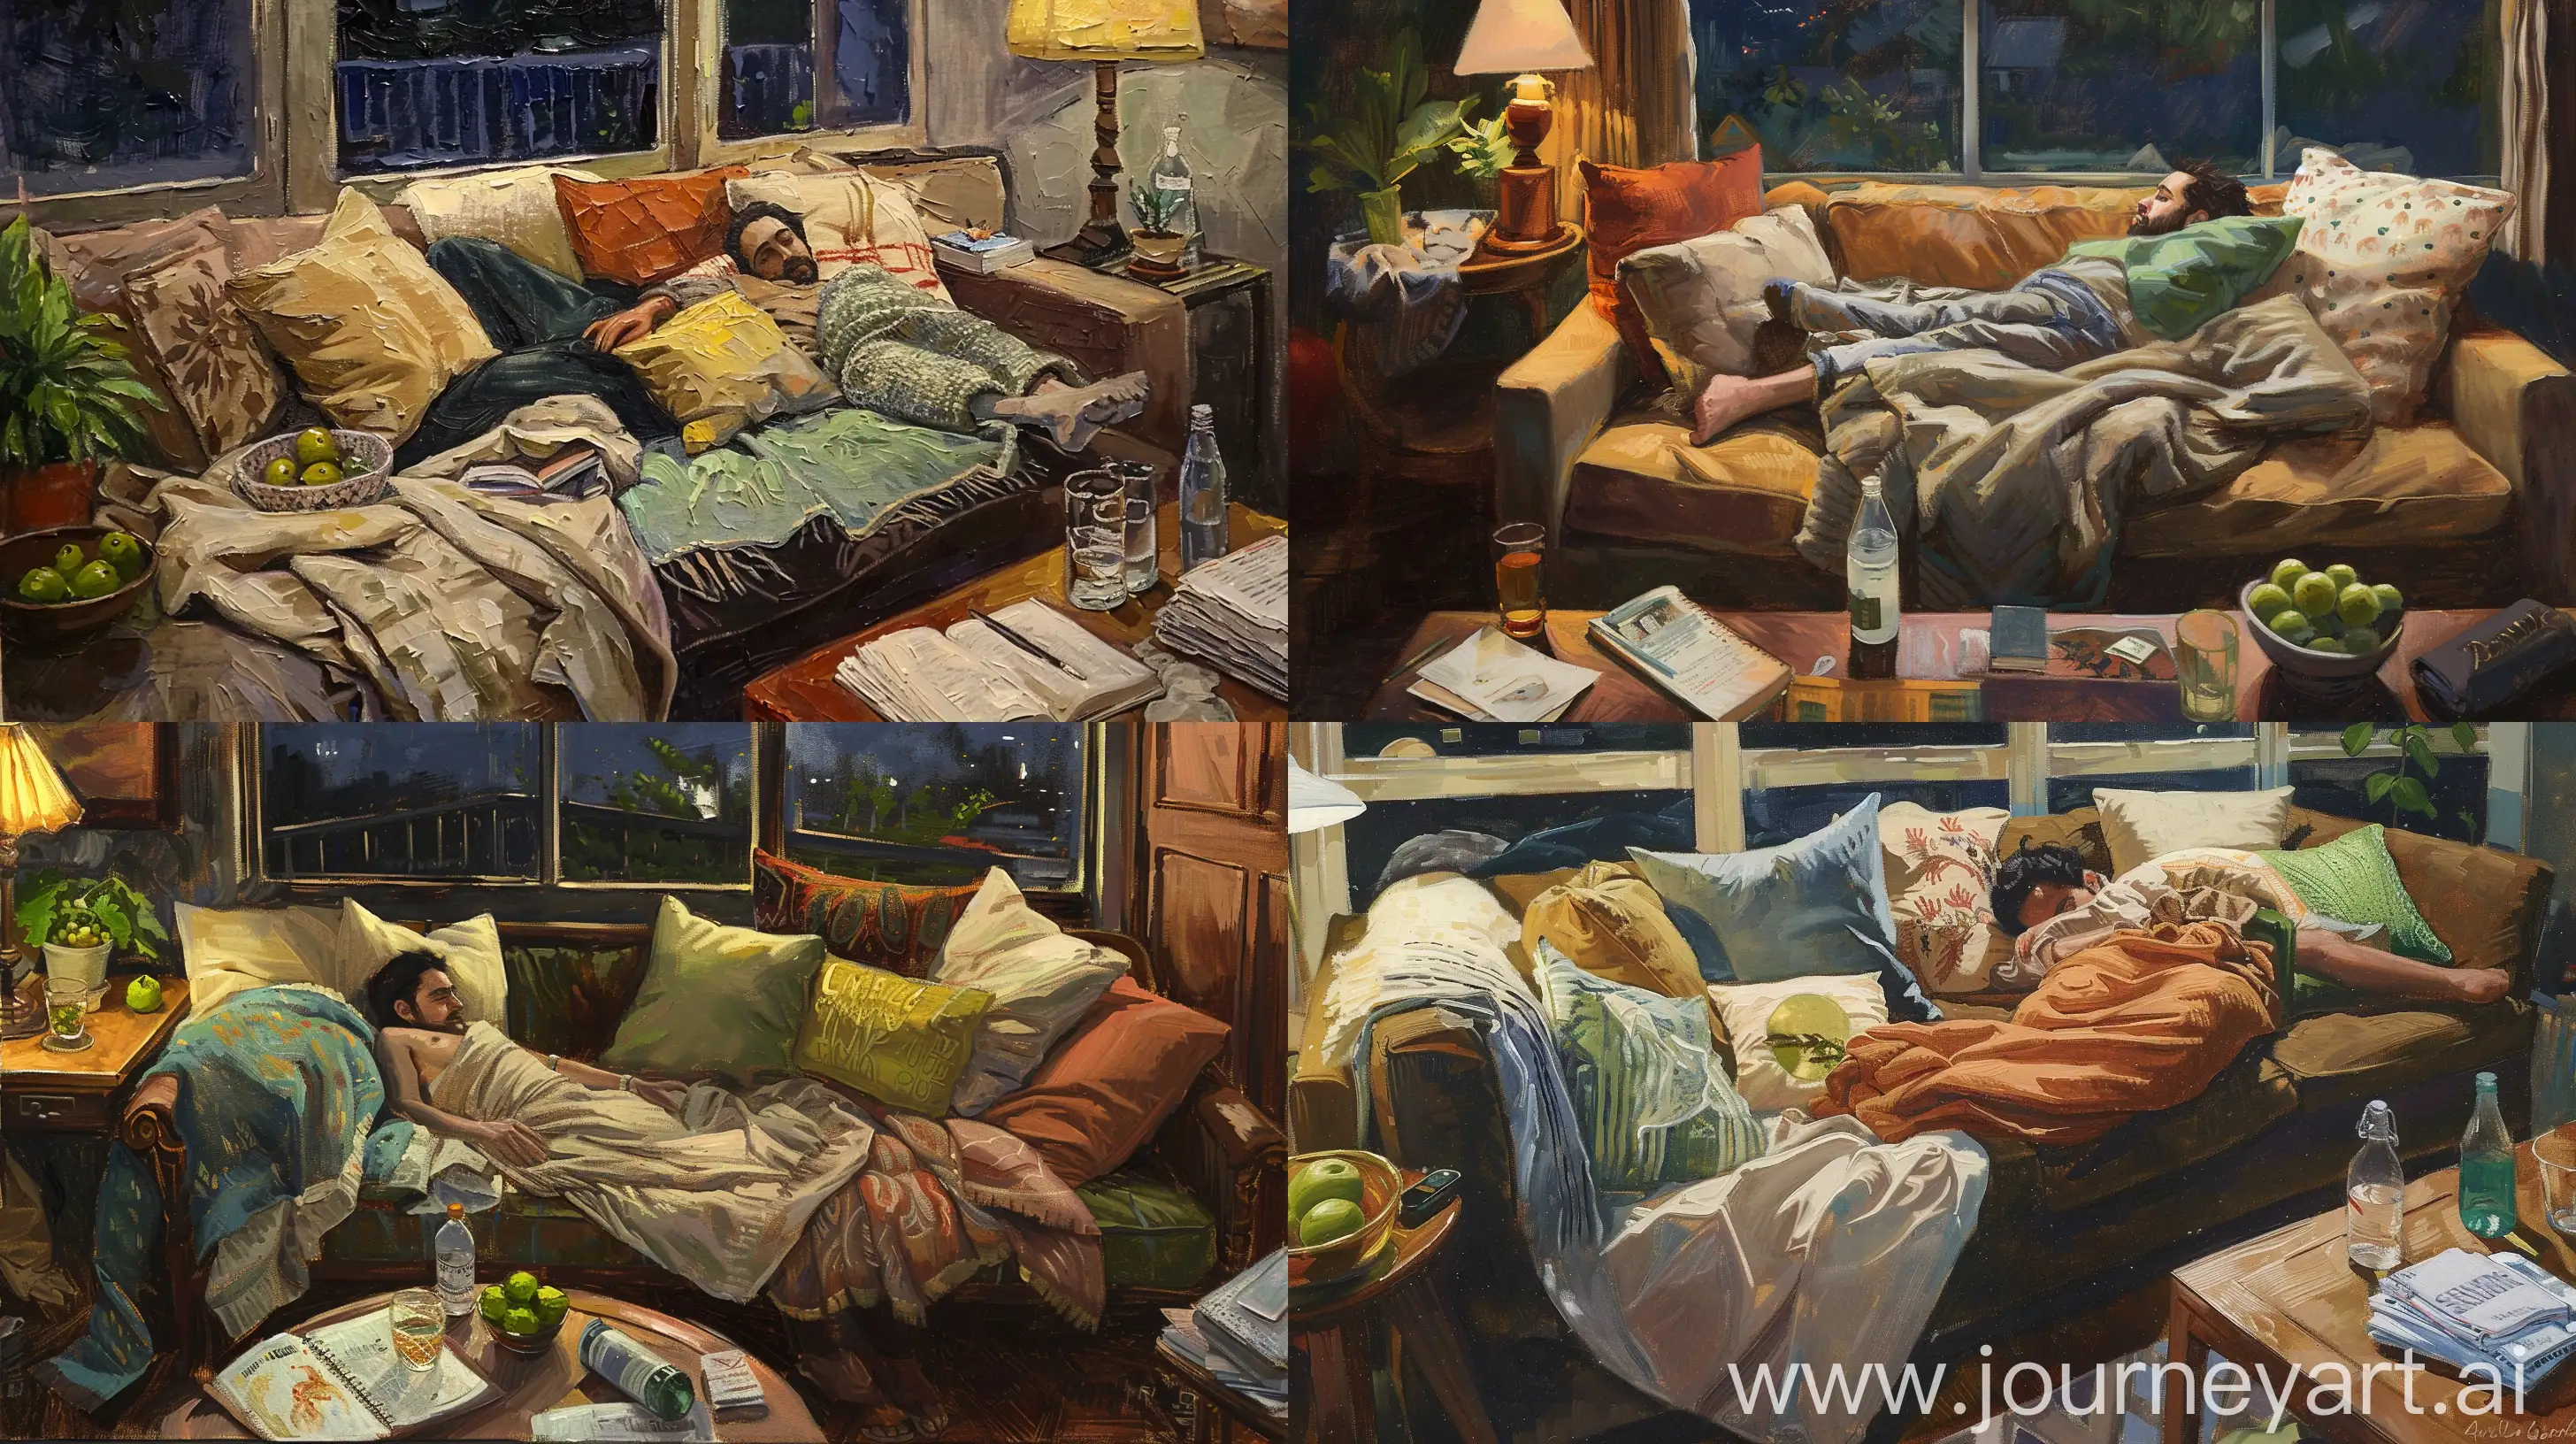 textured oil painting of an indoor scene with a person lying on a couch, The scene should include a cozy room with various pillows and a blanket on the couch, a window showing an outdoor view, a side table with a glass of water, a bottle, and papers or a book. Add a bowl of green fruit and a potted plant for a natural touch. Use an warm earthy color palette and aim for a textured painting style. the scene is in nighttime --iw 2.0 --ar 16:9